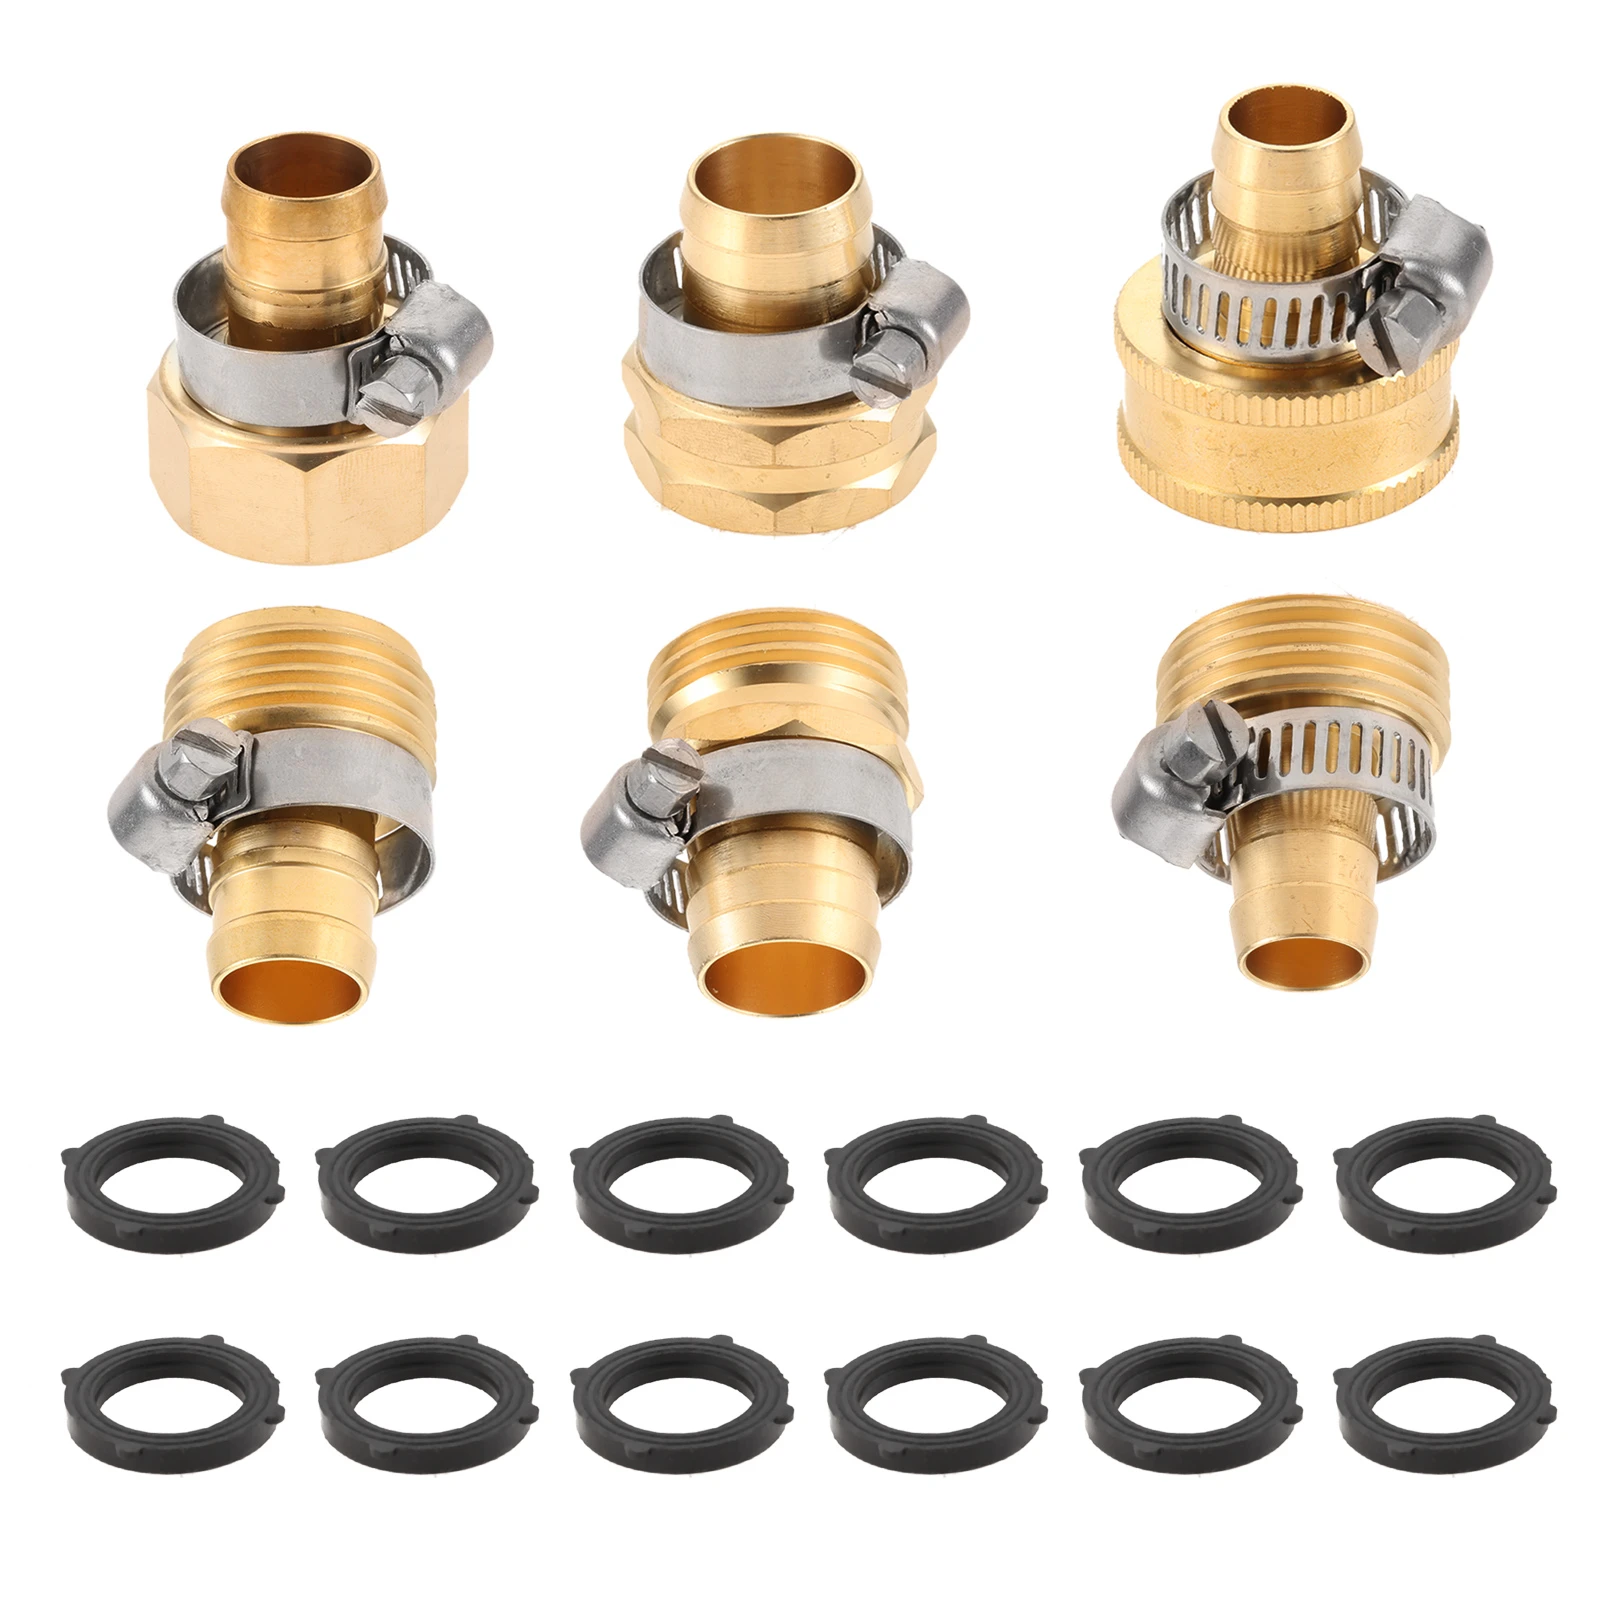 Male Female Hose Connector with Stainless Steel Clamp 3 Sets 5//8 Brass Garden Hose Repair Mender Water Hose End Replacement